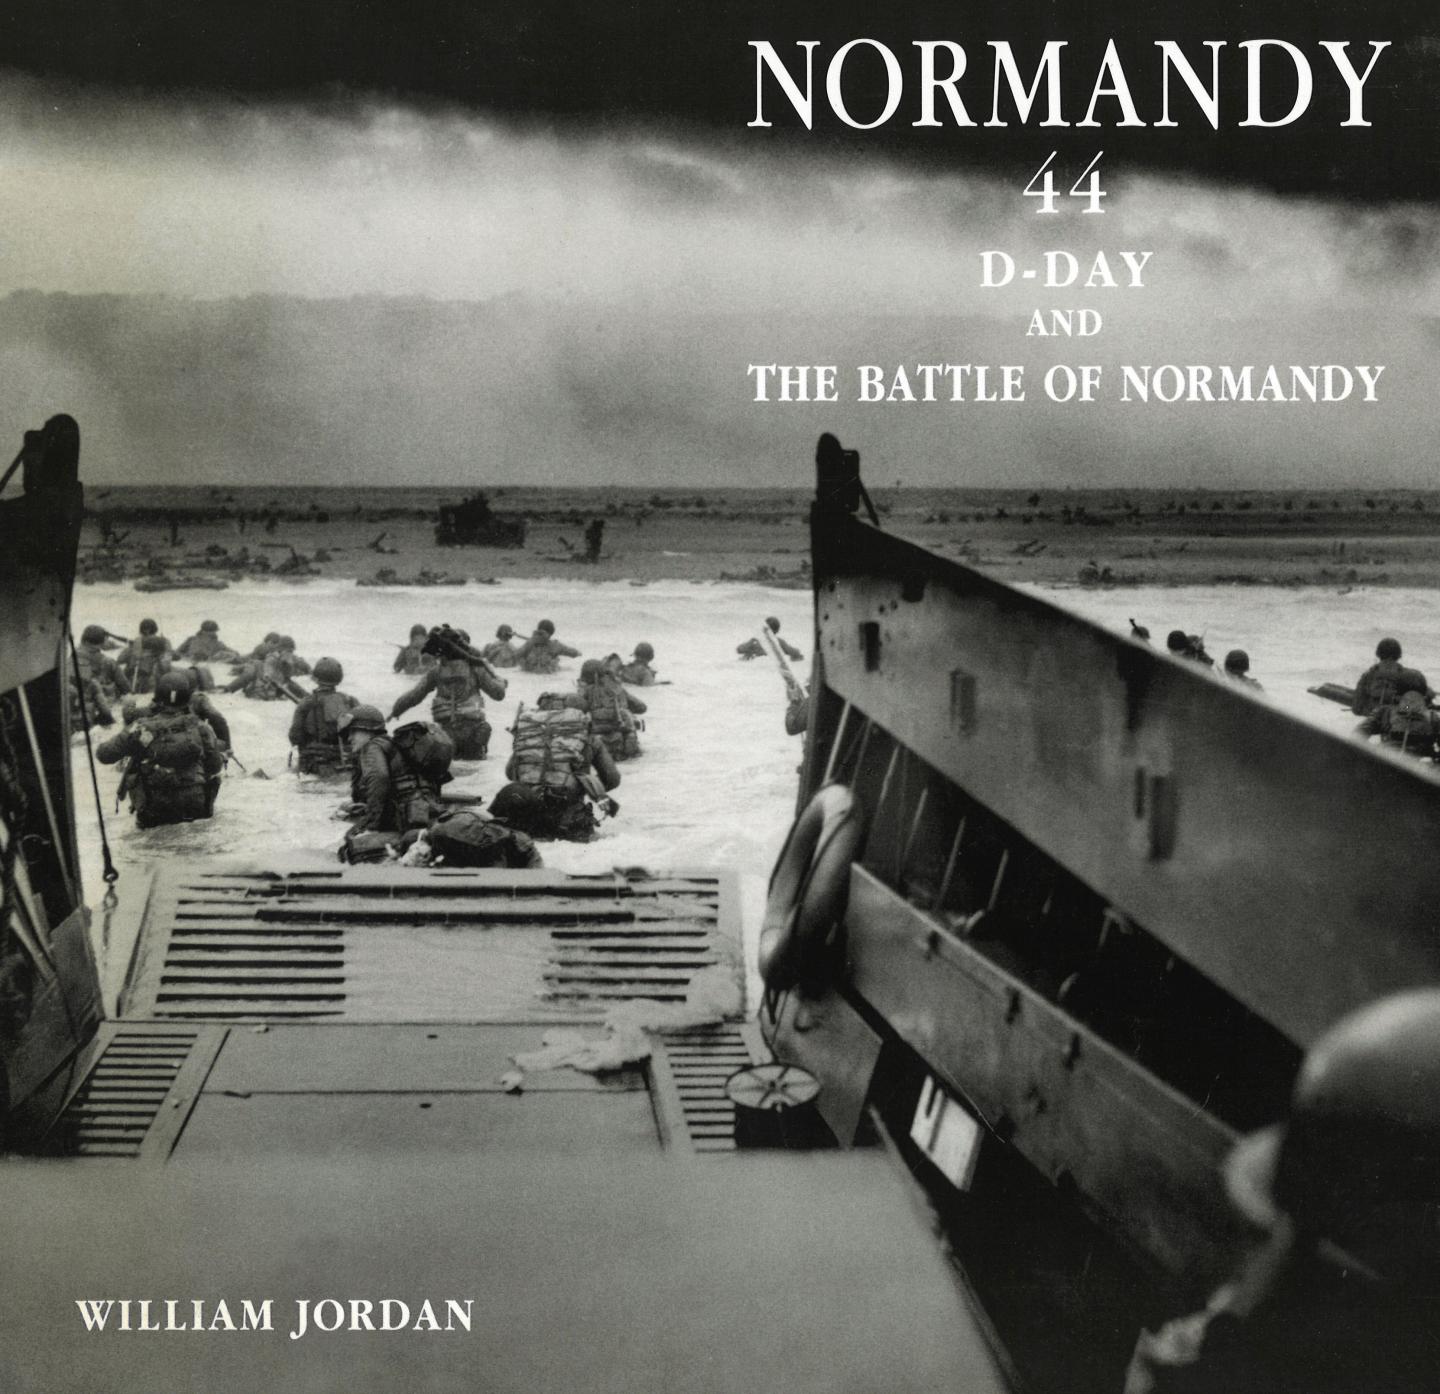 Jordan, William - Normandy 44 - D-Day and The Battle of Normandy